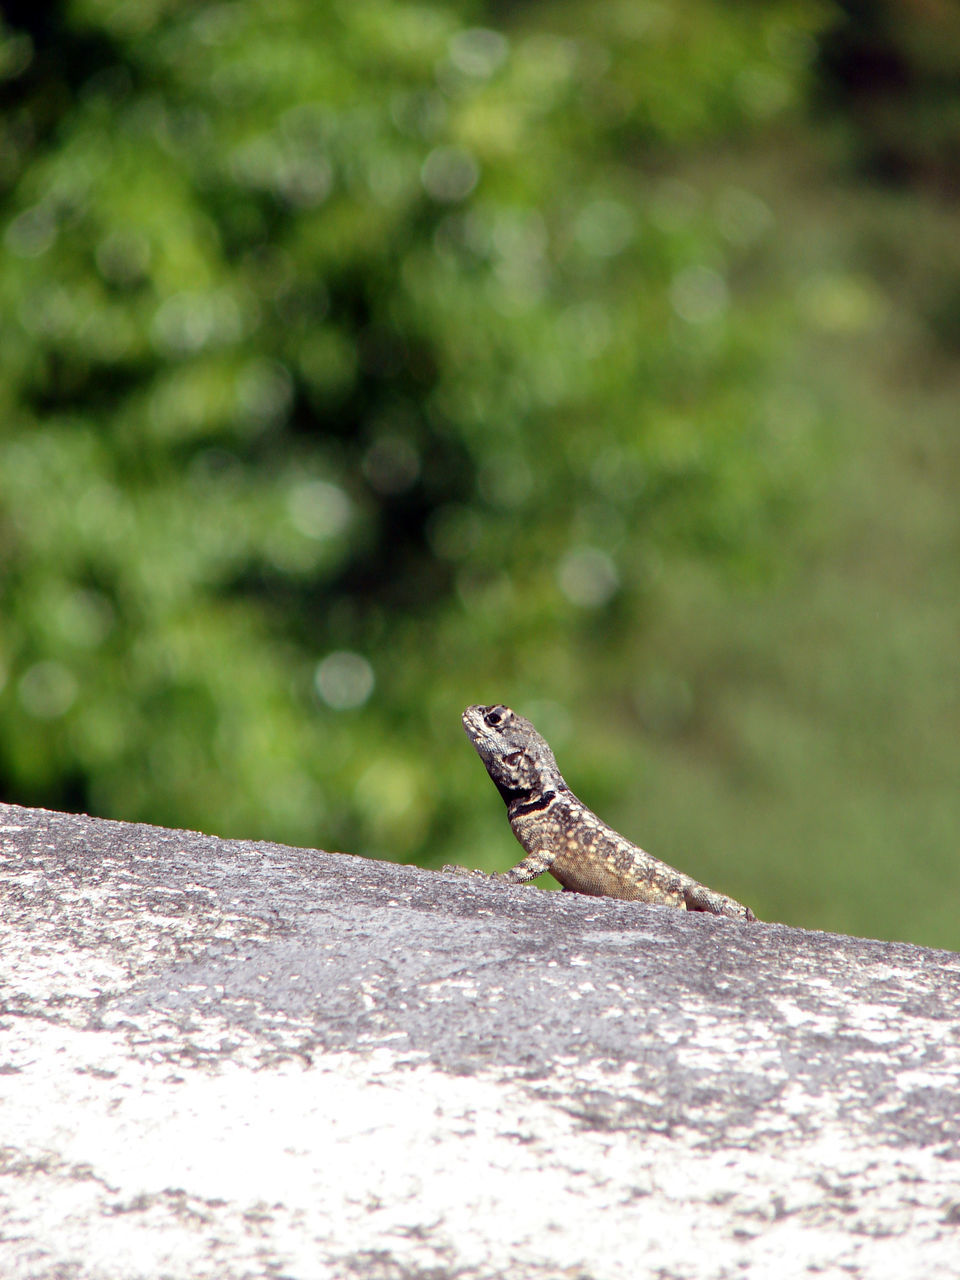 CLOSE-UP OF LIZARD ON ROCK OUTDOORS